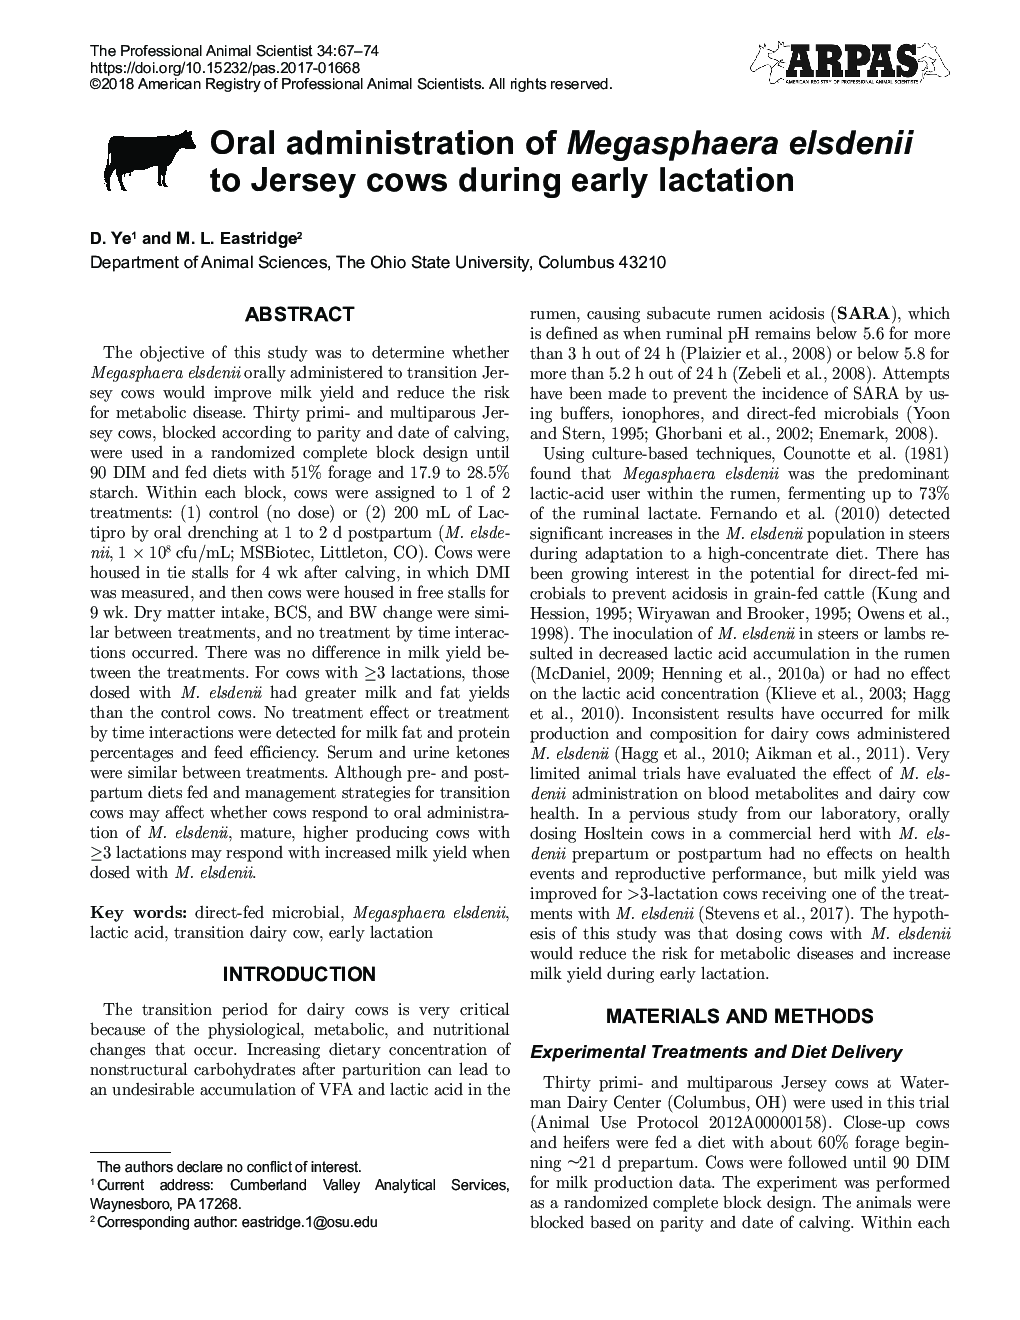 Oral administration of Megasphaera elsdenii to Jersey cows during early lactation